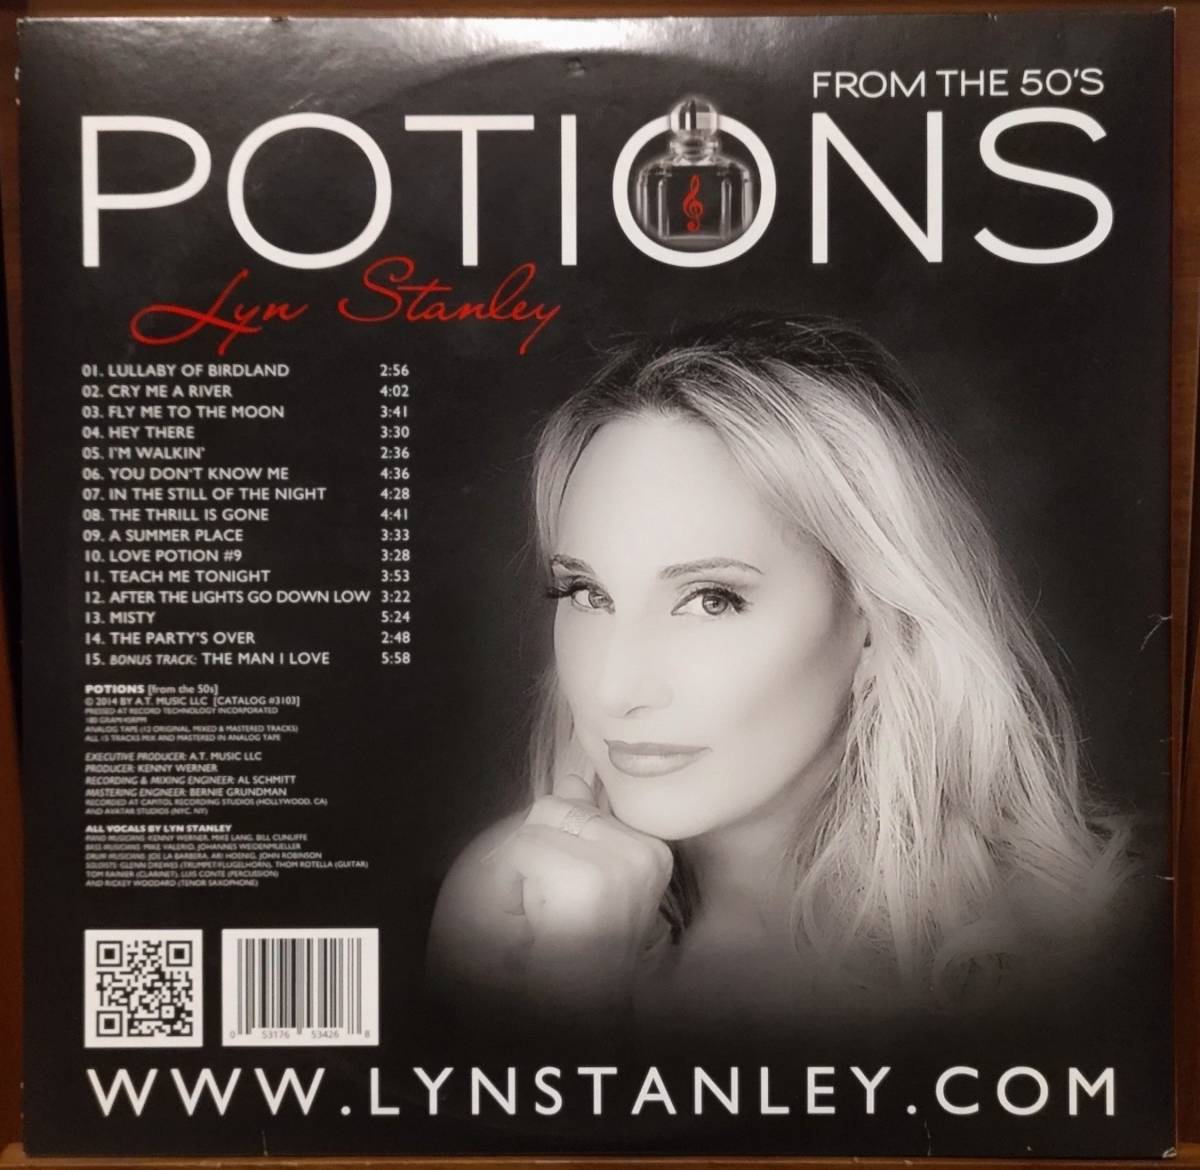 Lyn Stanley リン・スタンレー / POTIONS From The 50'S 180gr 45rpm 高音質重量盤 ２枚組_画像2